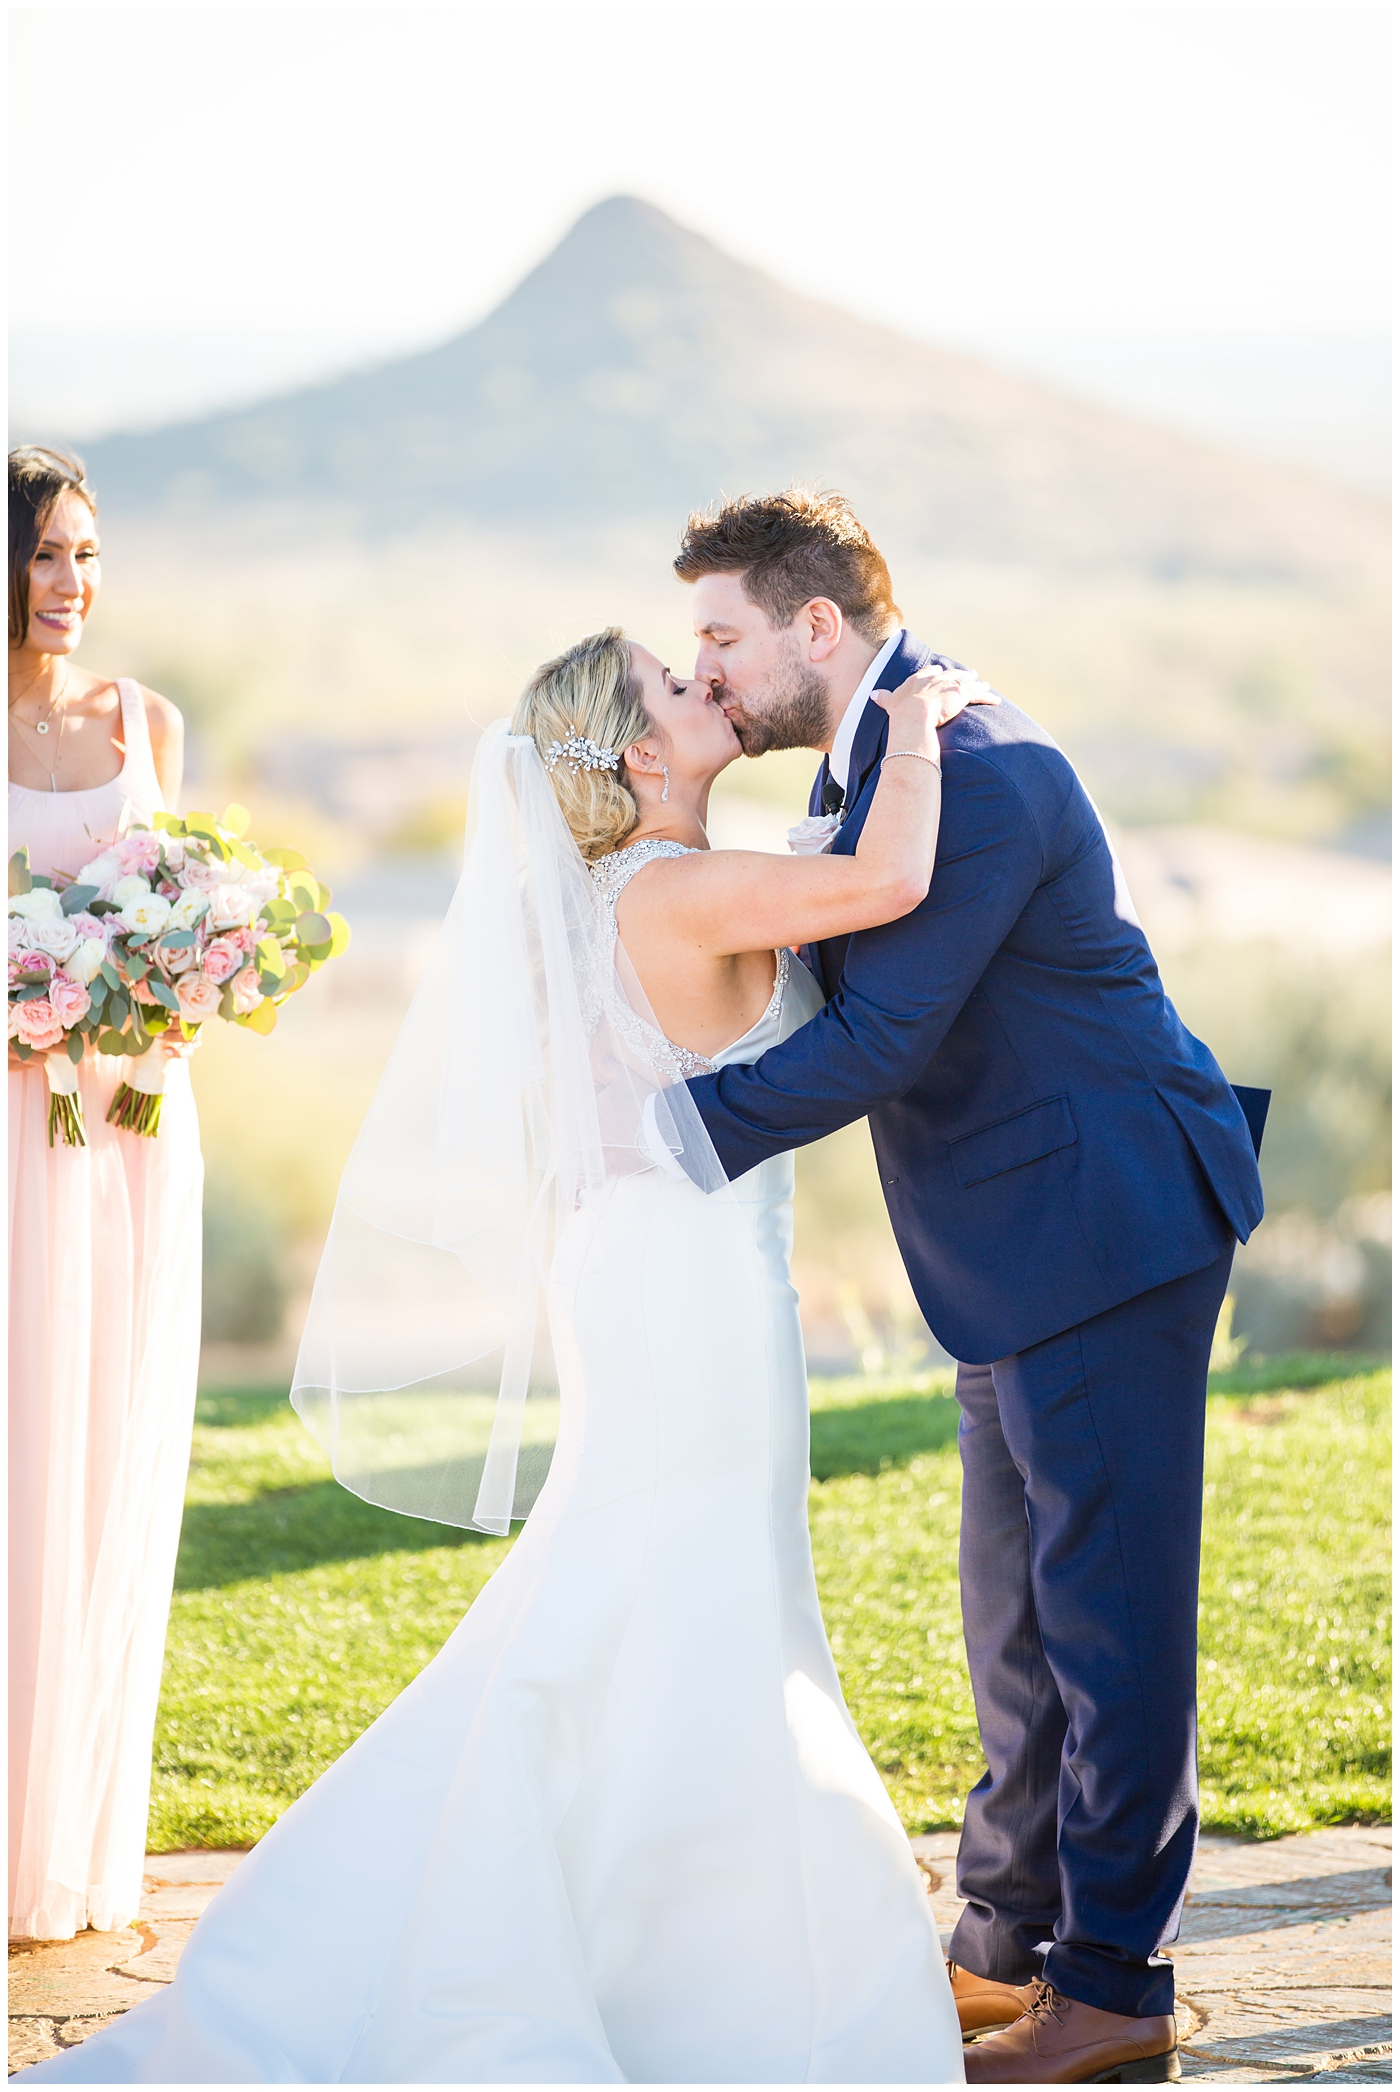 gorgeous bride with side swept hair in racerback pronovias dress and blush pink, white rose and eucalyptus greenery wedding bouquet with groom in navy suit and tie first kiss at wedding ceremony outside